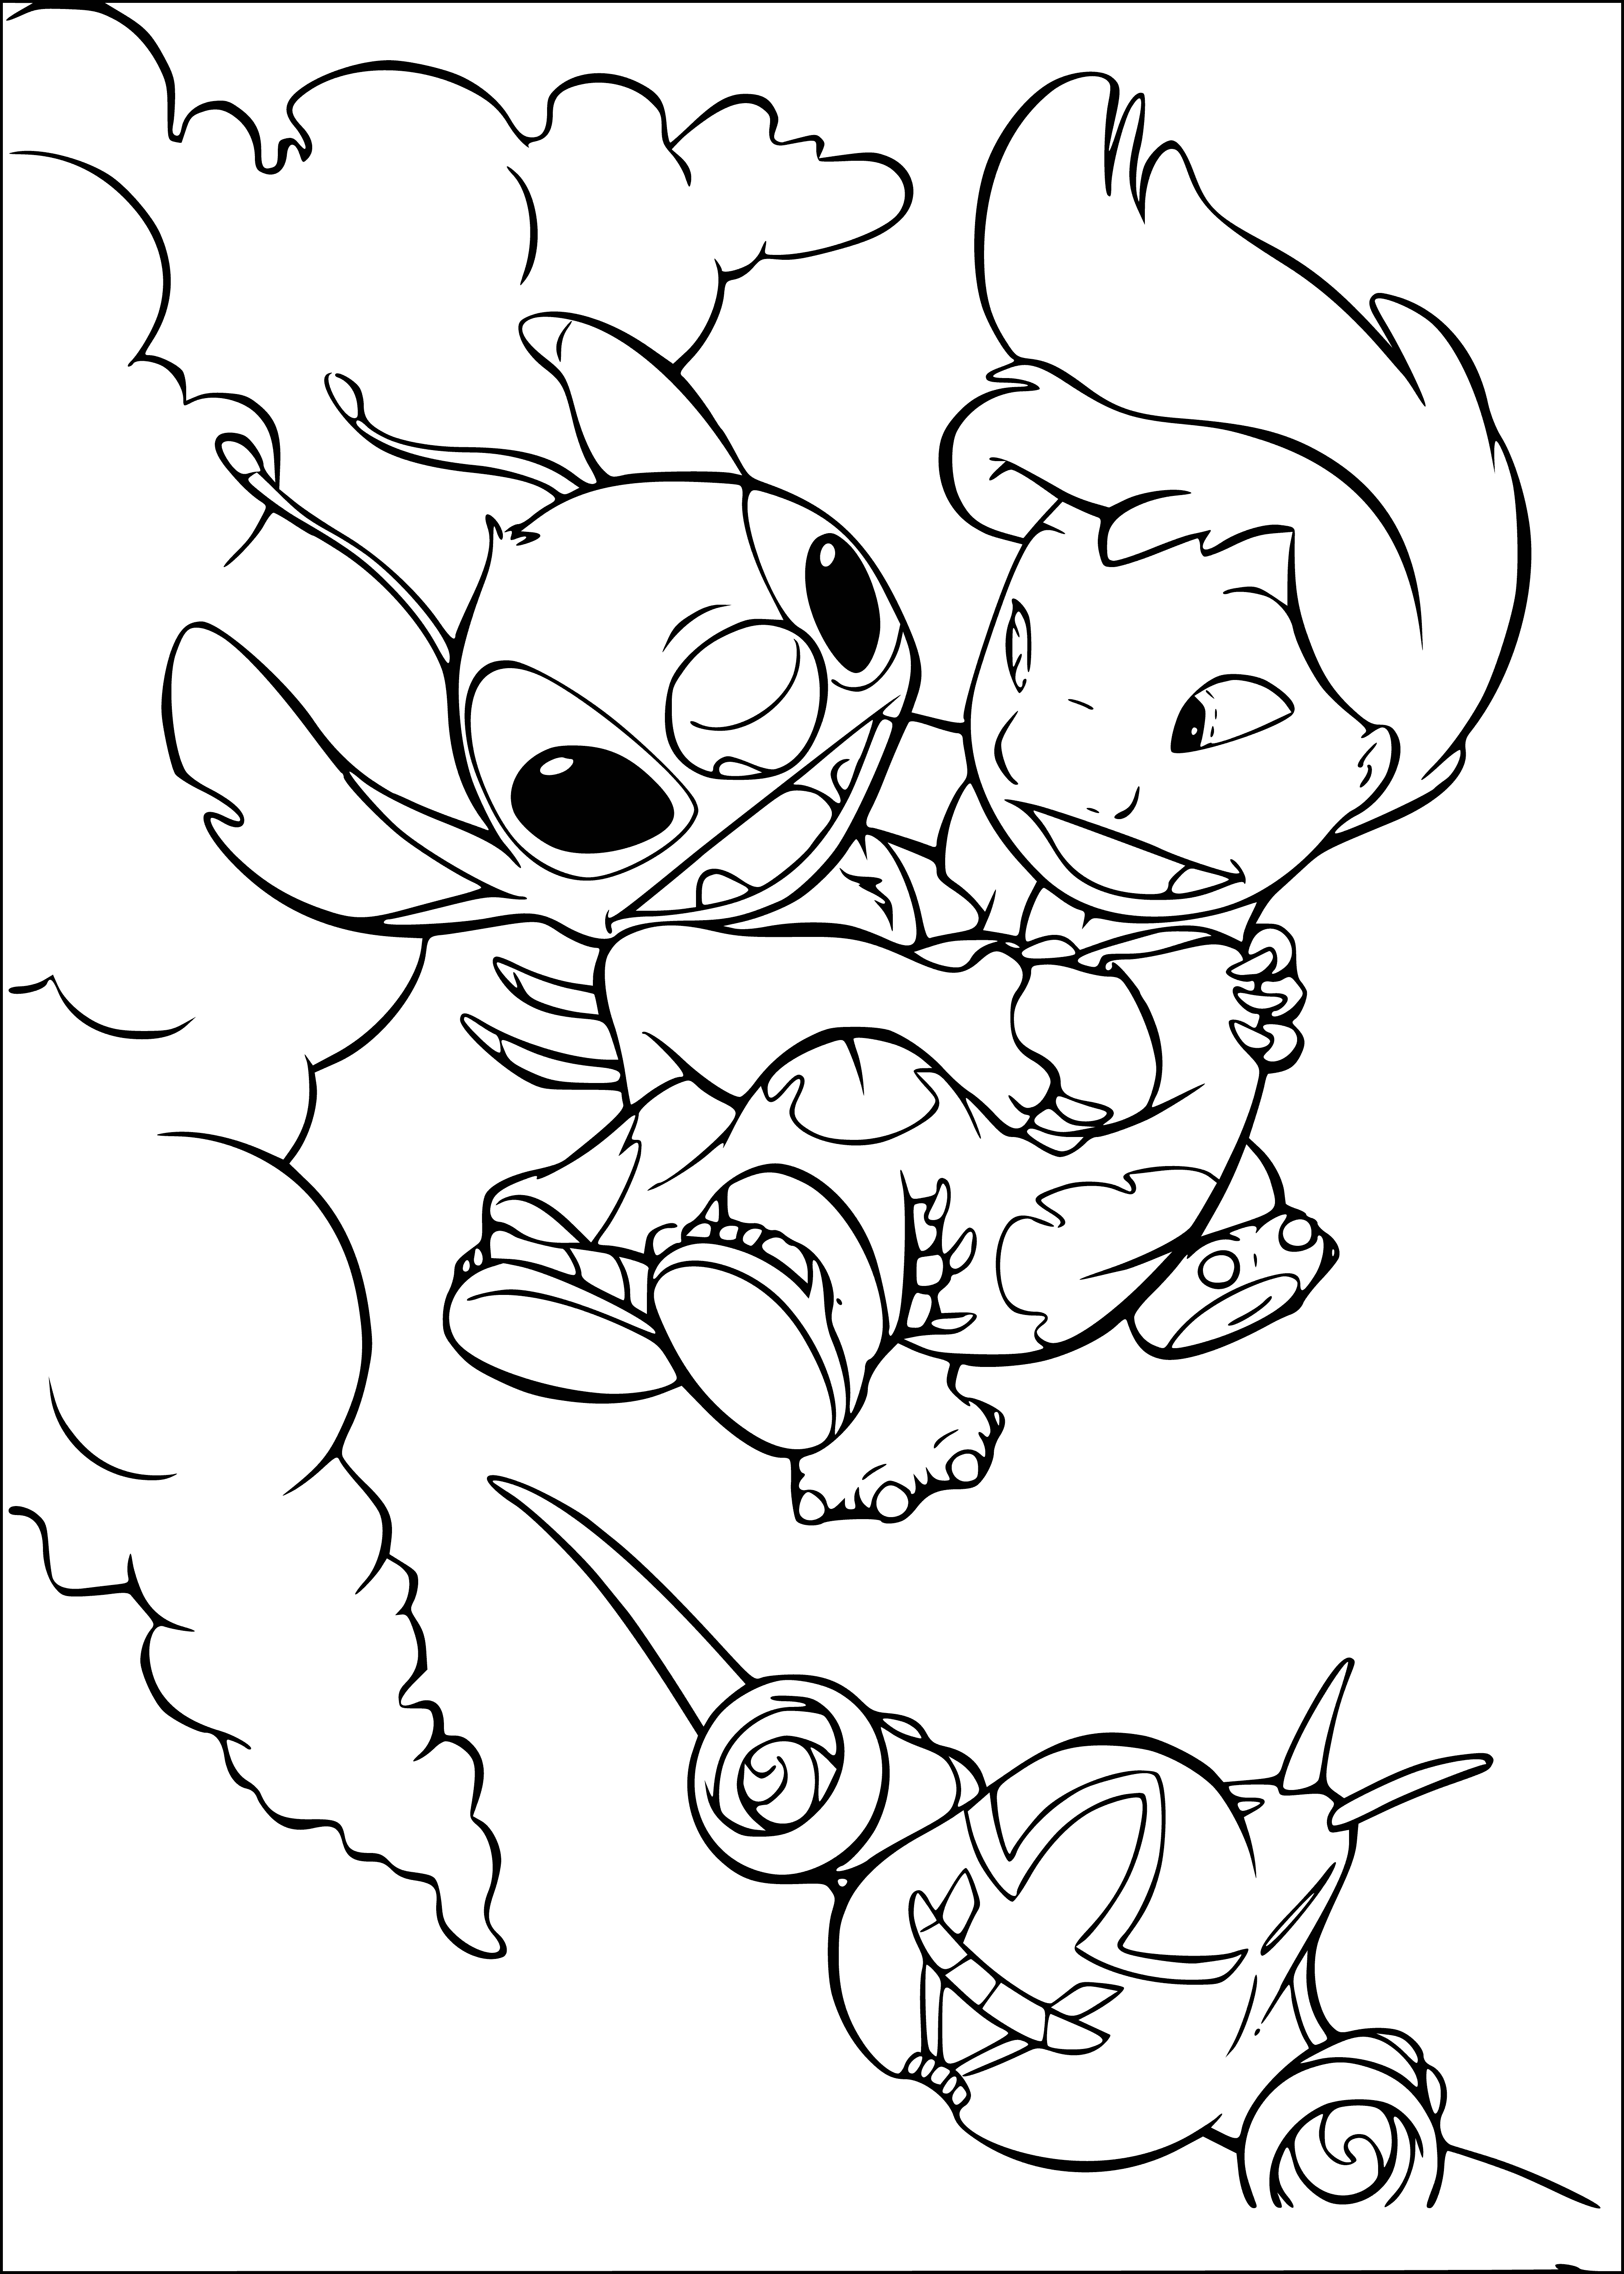 coloring page: Stitch offers comfort to Lila in a dark room. She's scared, but receptive to his calming words.